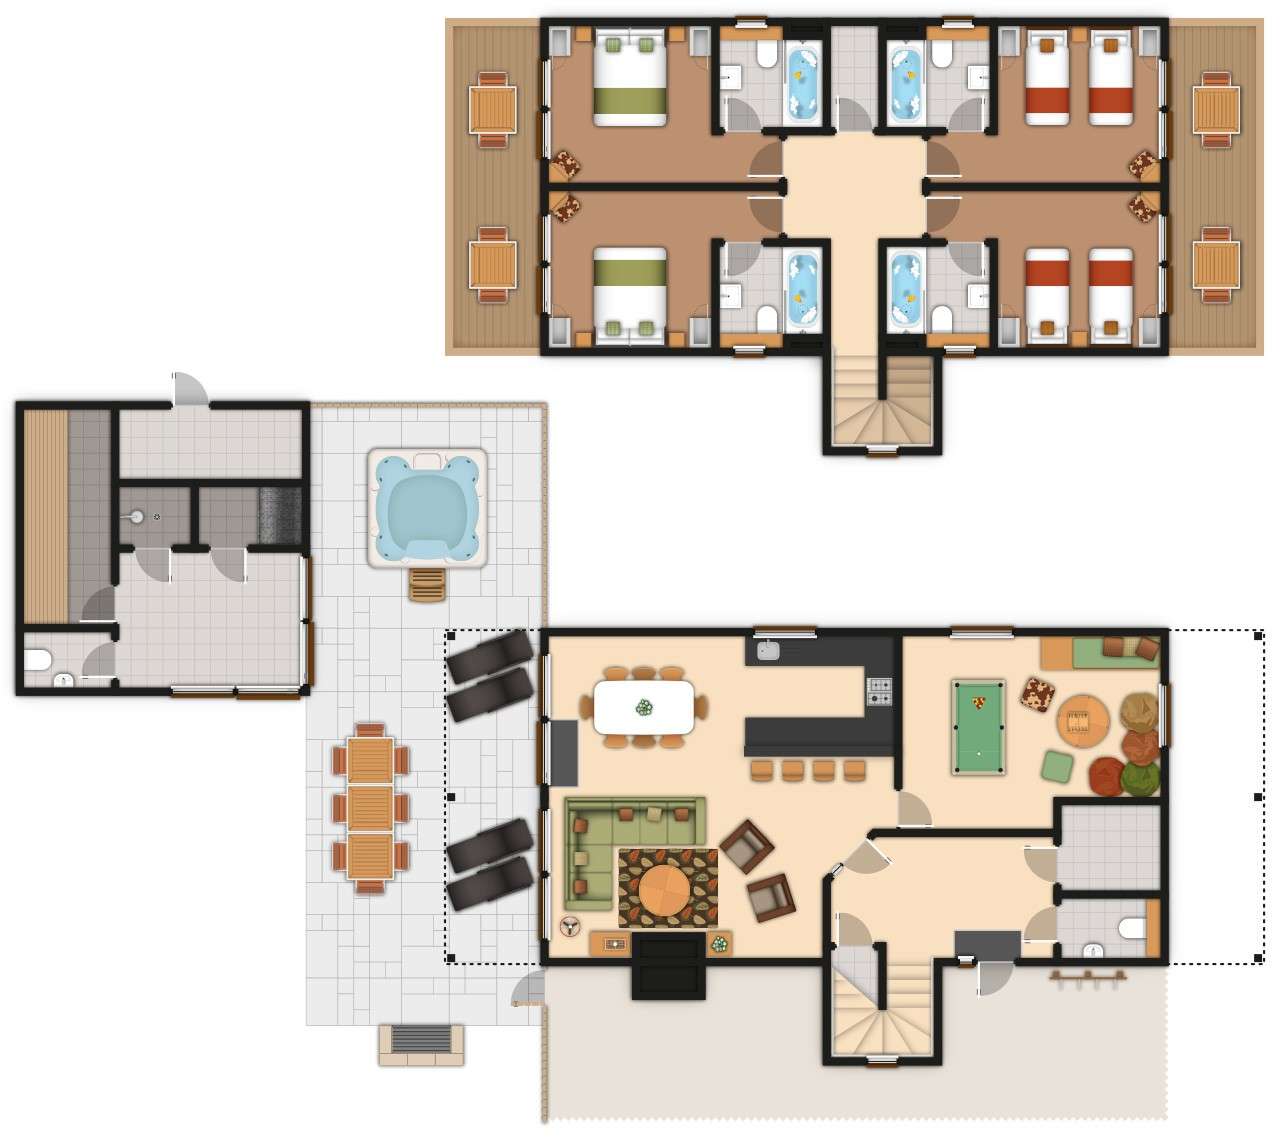 A detailed lodge floor plan illustration showing bedrooms, bathrooms, living area, kitchen, games room and outdoor space including hot tub. If you require further assistance viewing the floor plan or need further information on the accommodation type please contact Guest Services.